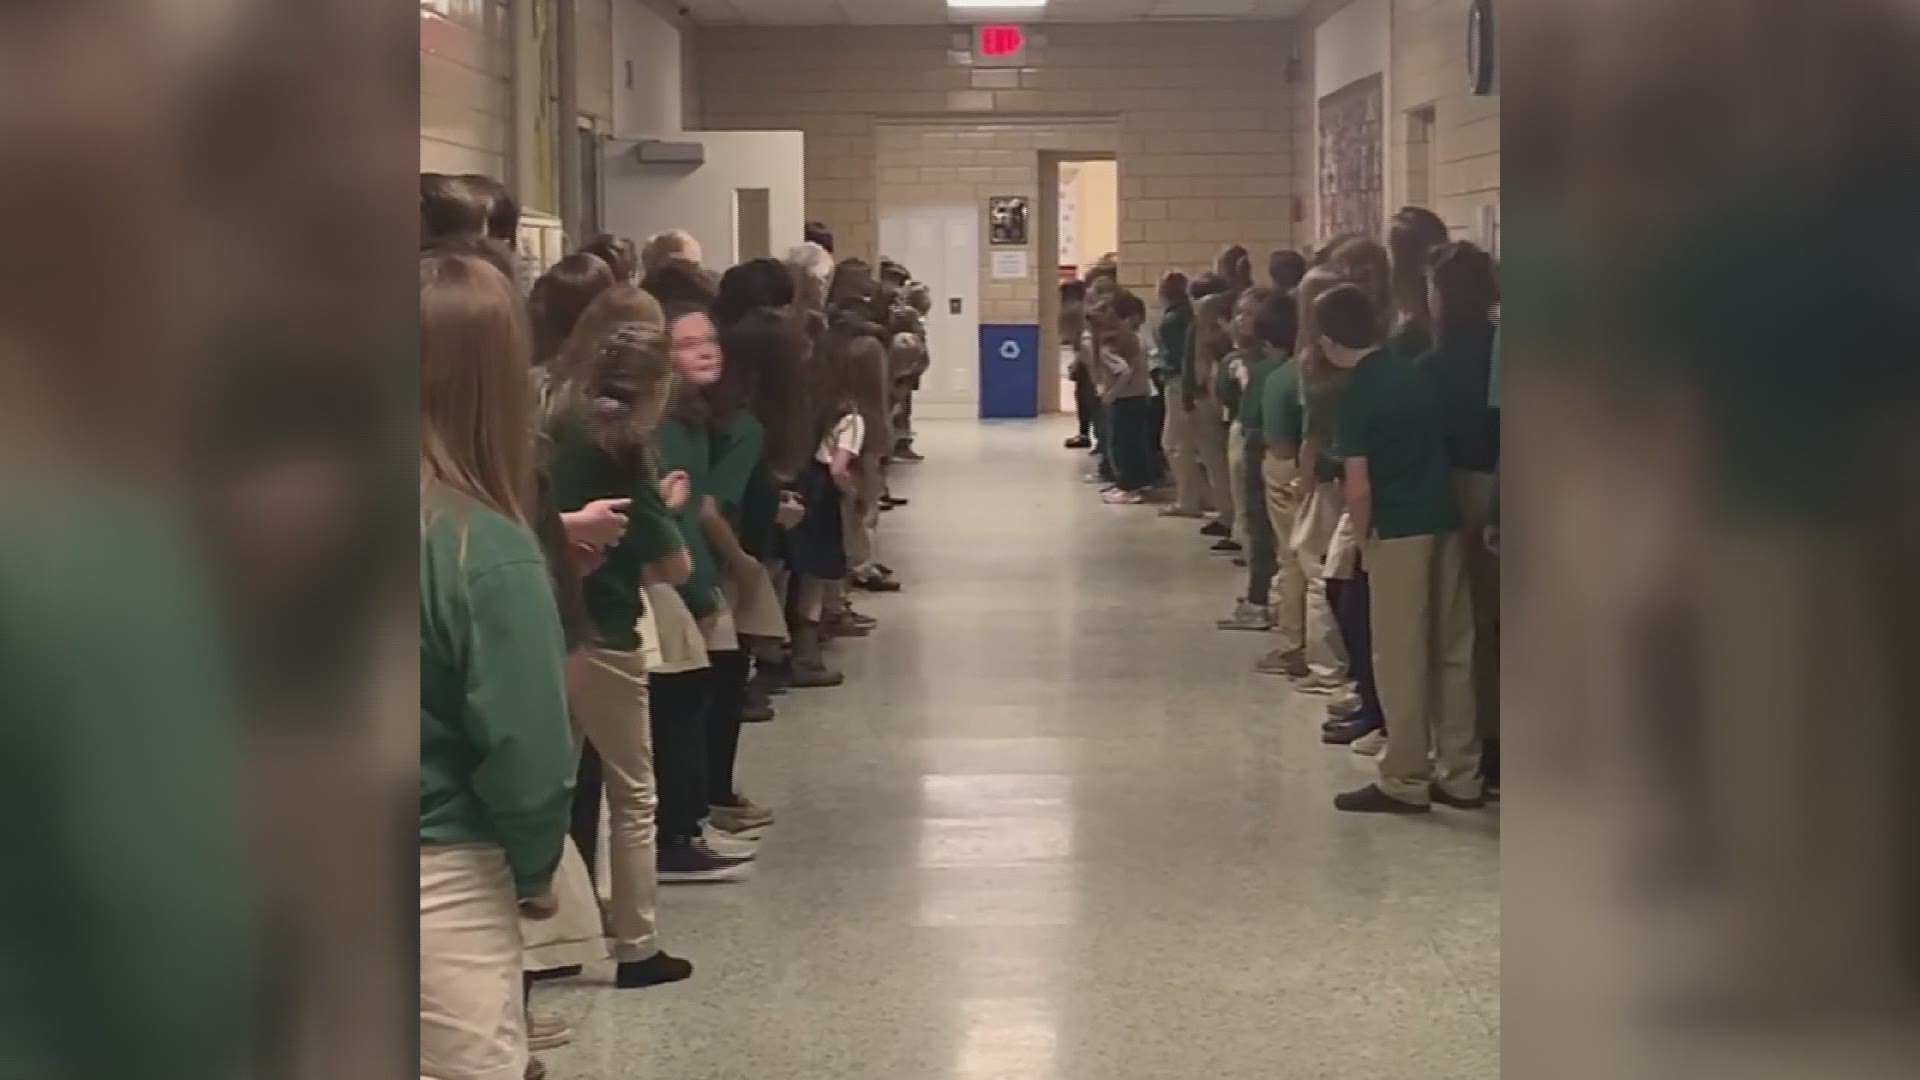 St. Helen's Catholic School in Newbury gave 6-year-old John Oliver Zippay a standing ovation after his last chemo treatment. (Courtesy Megan Zippay)